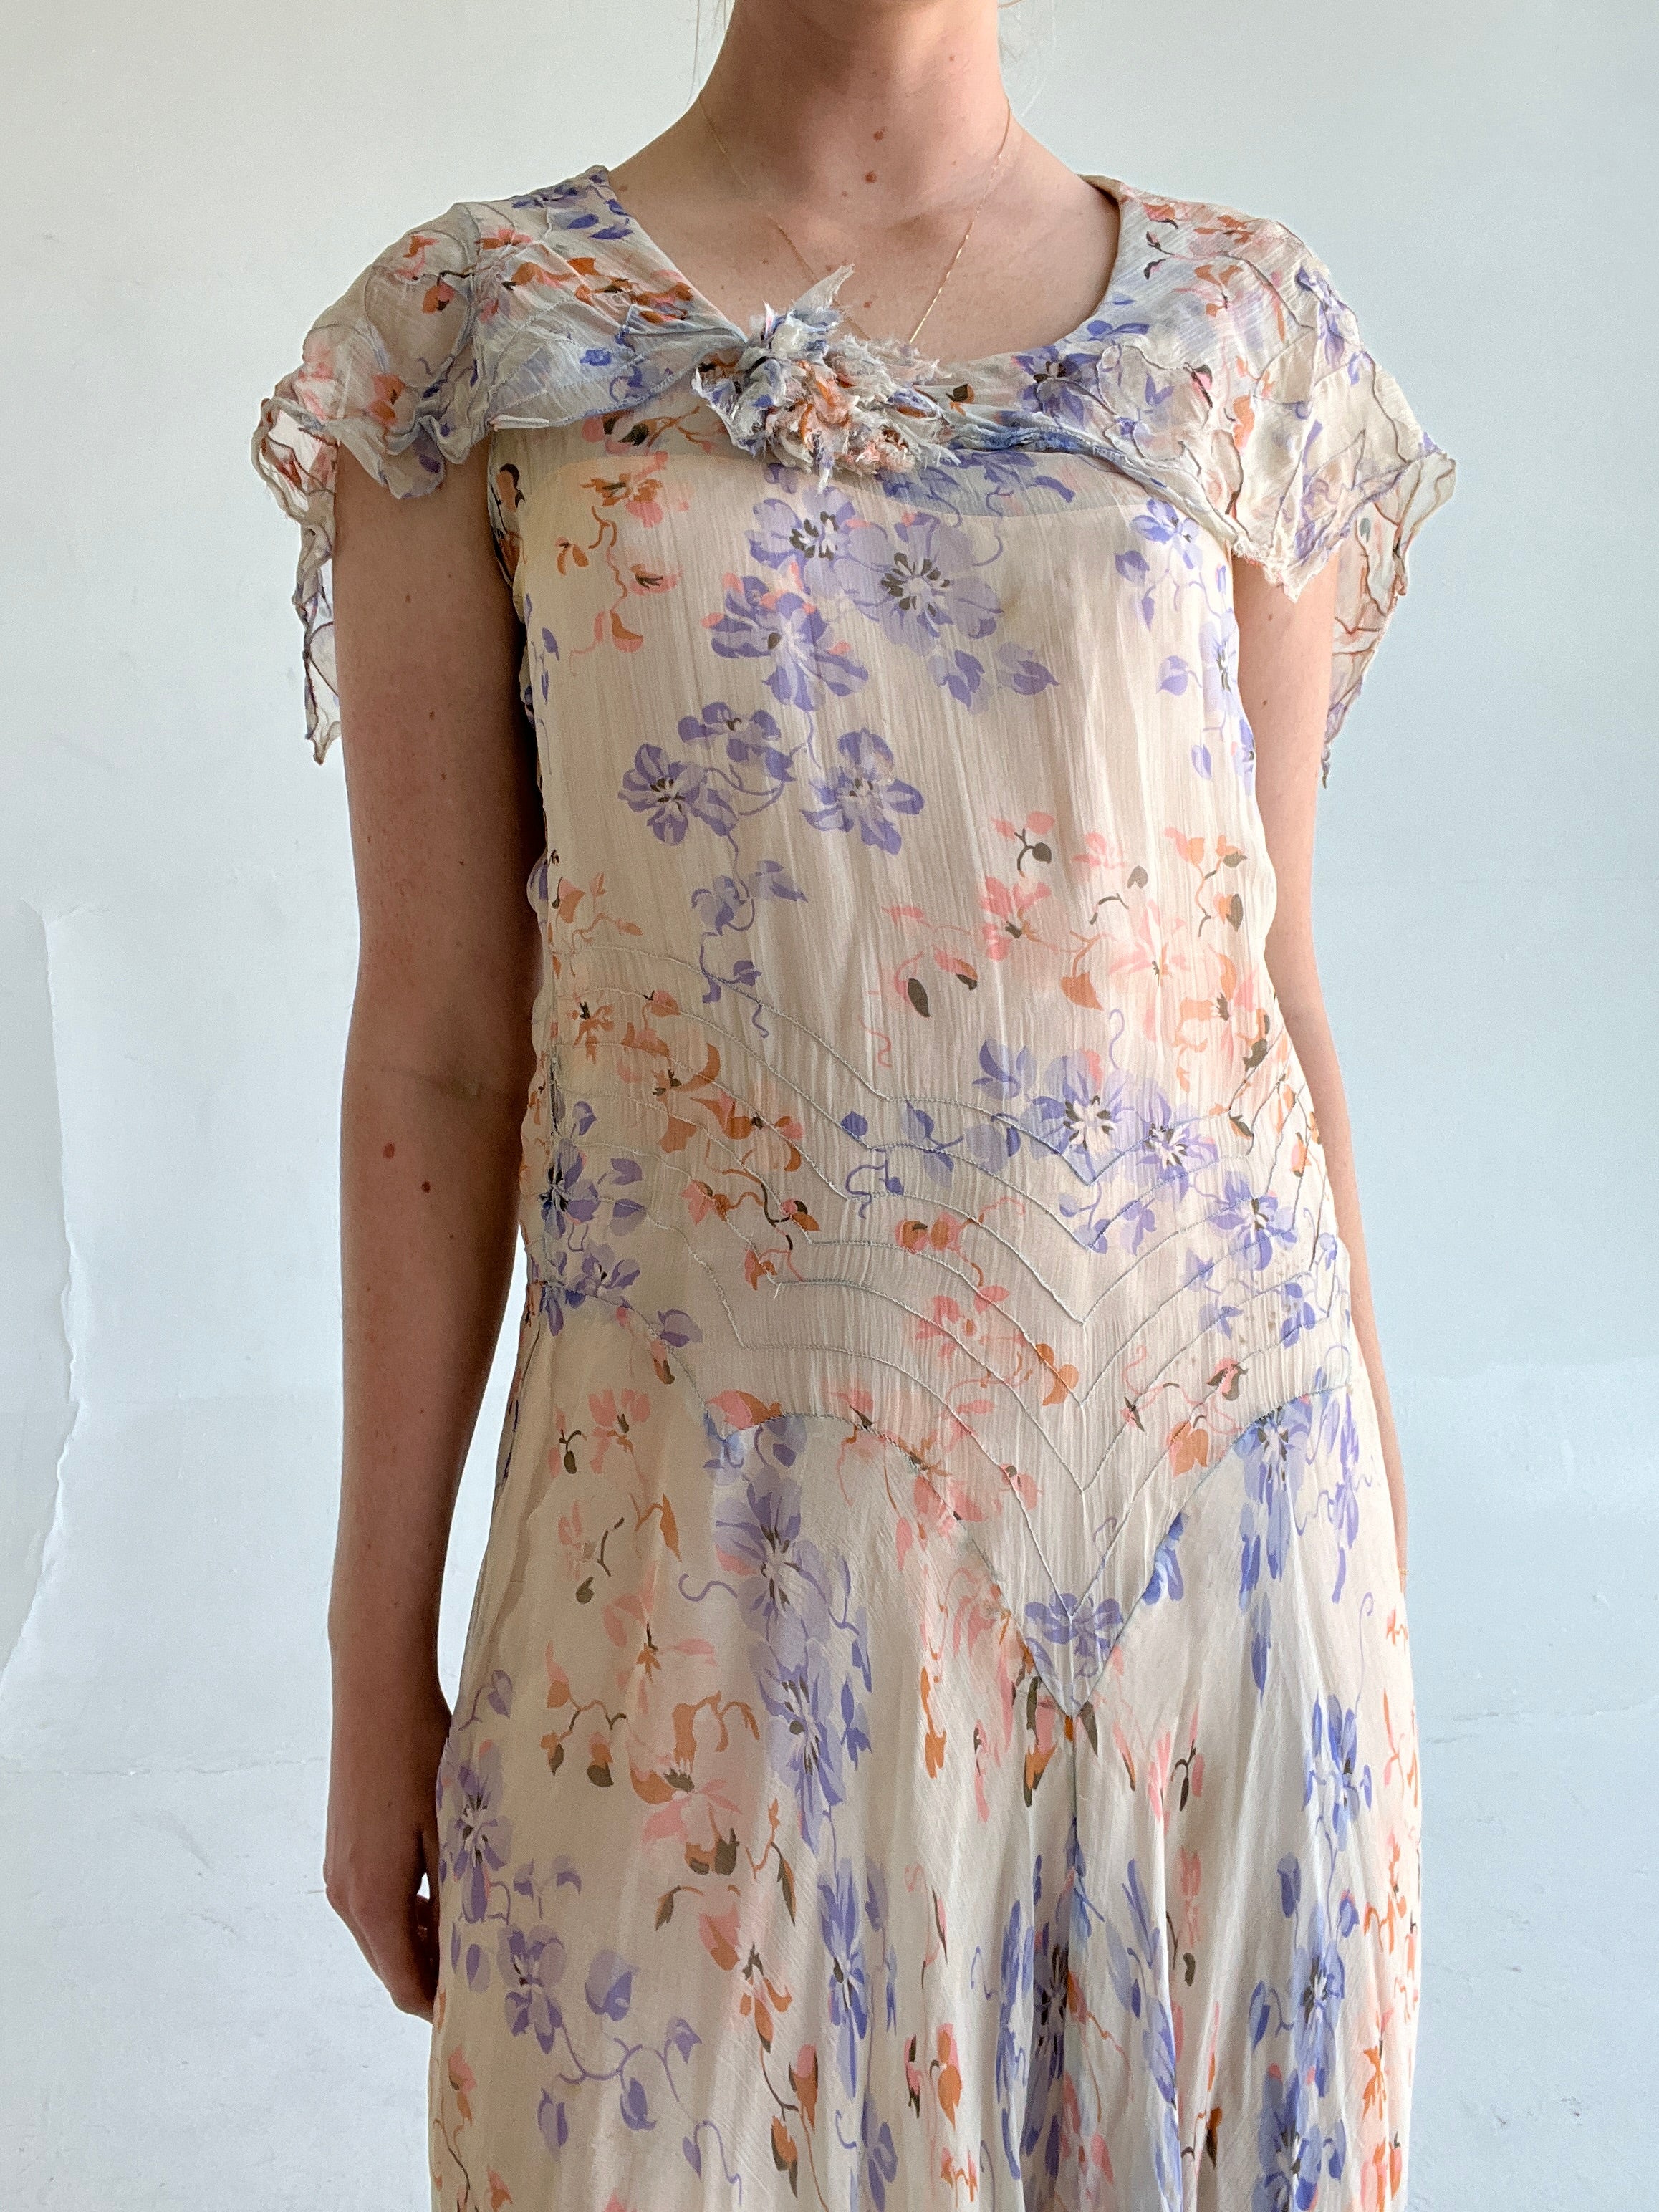 1920's Floral Chiffon Gown